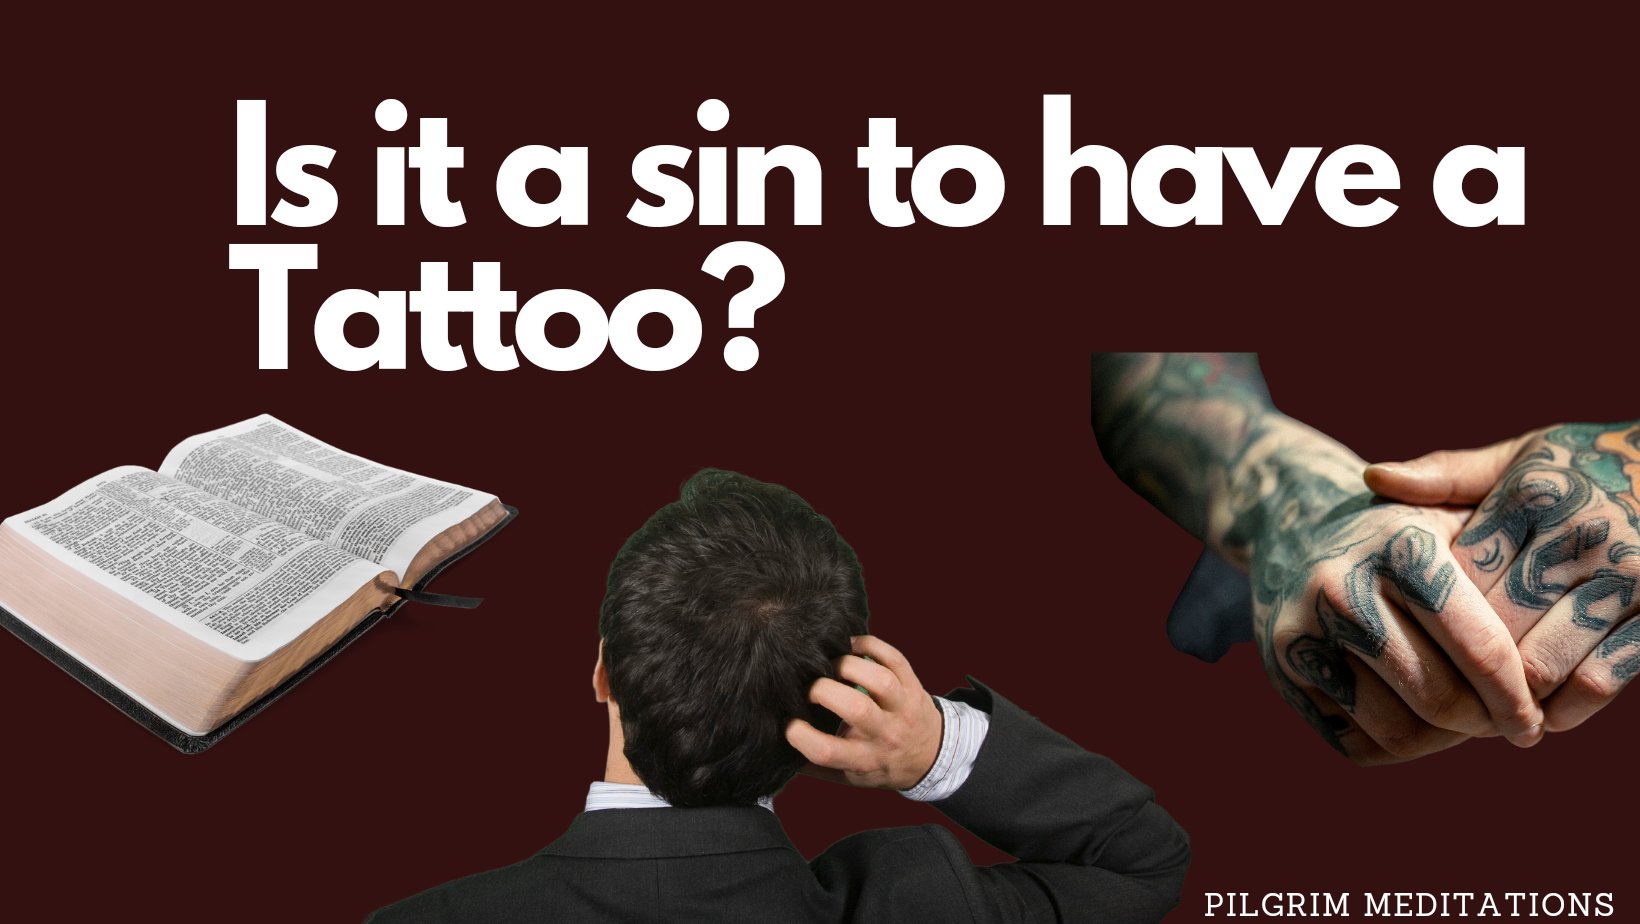 What Does the Bible say about Tattoos? - PILGRIM MEDITATIONS